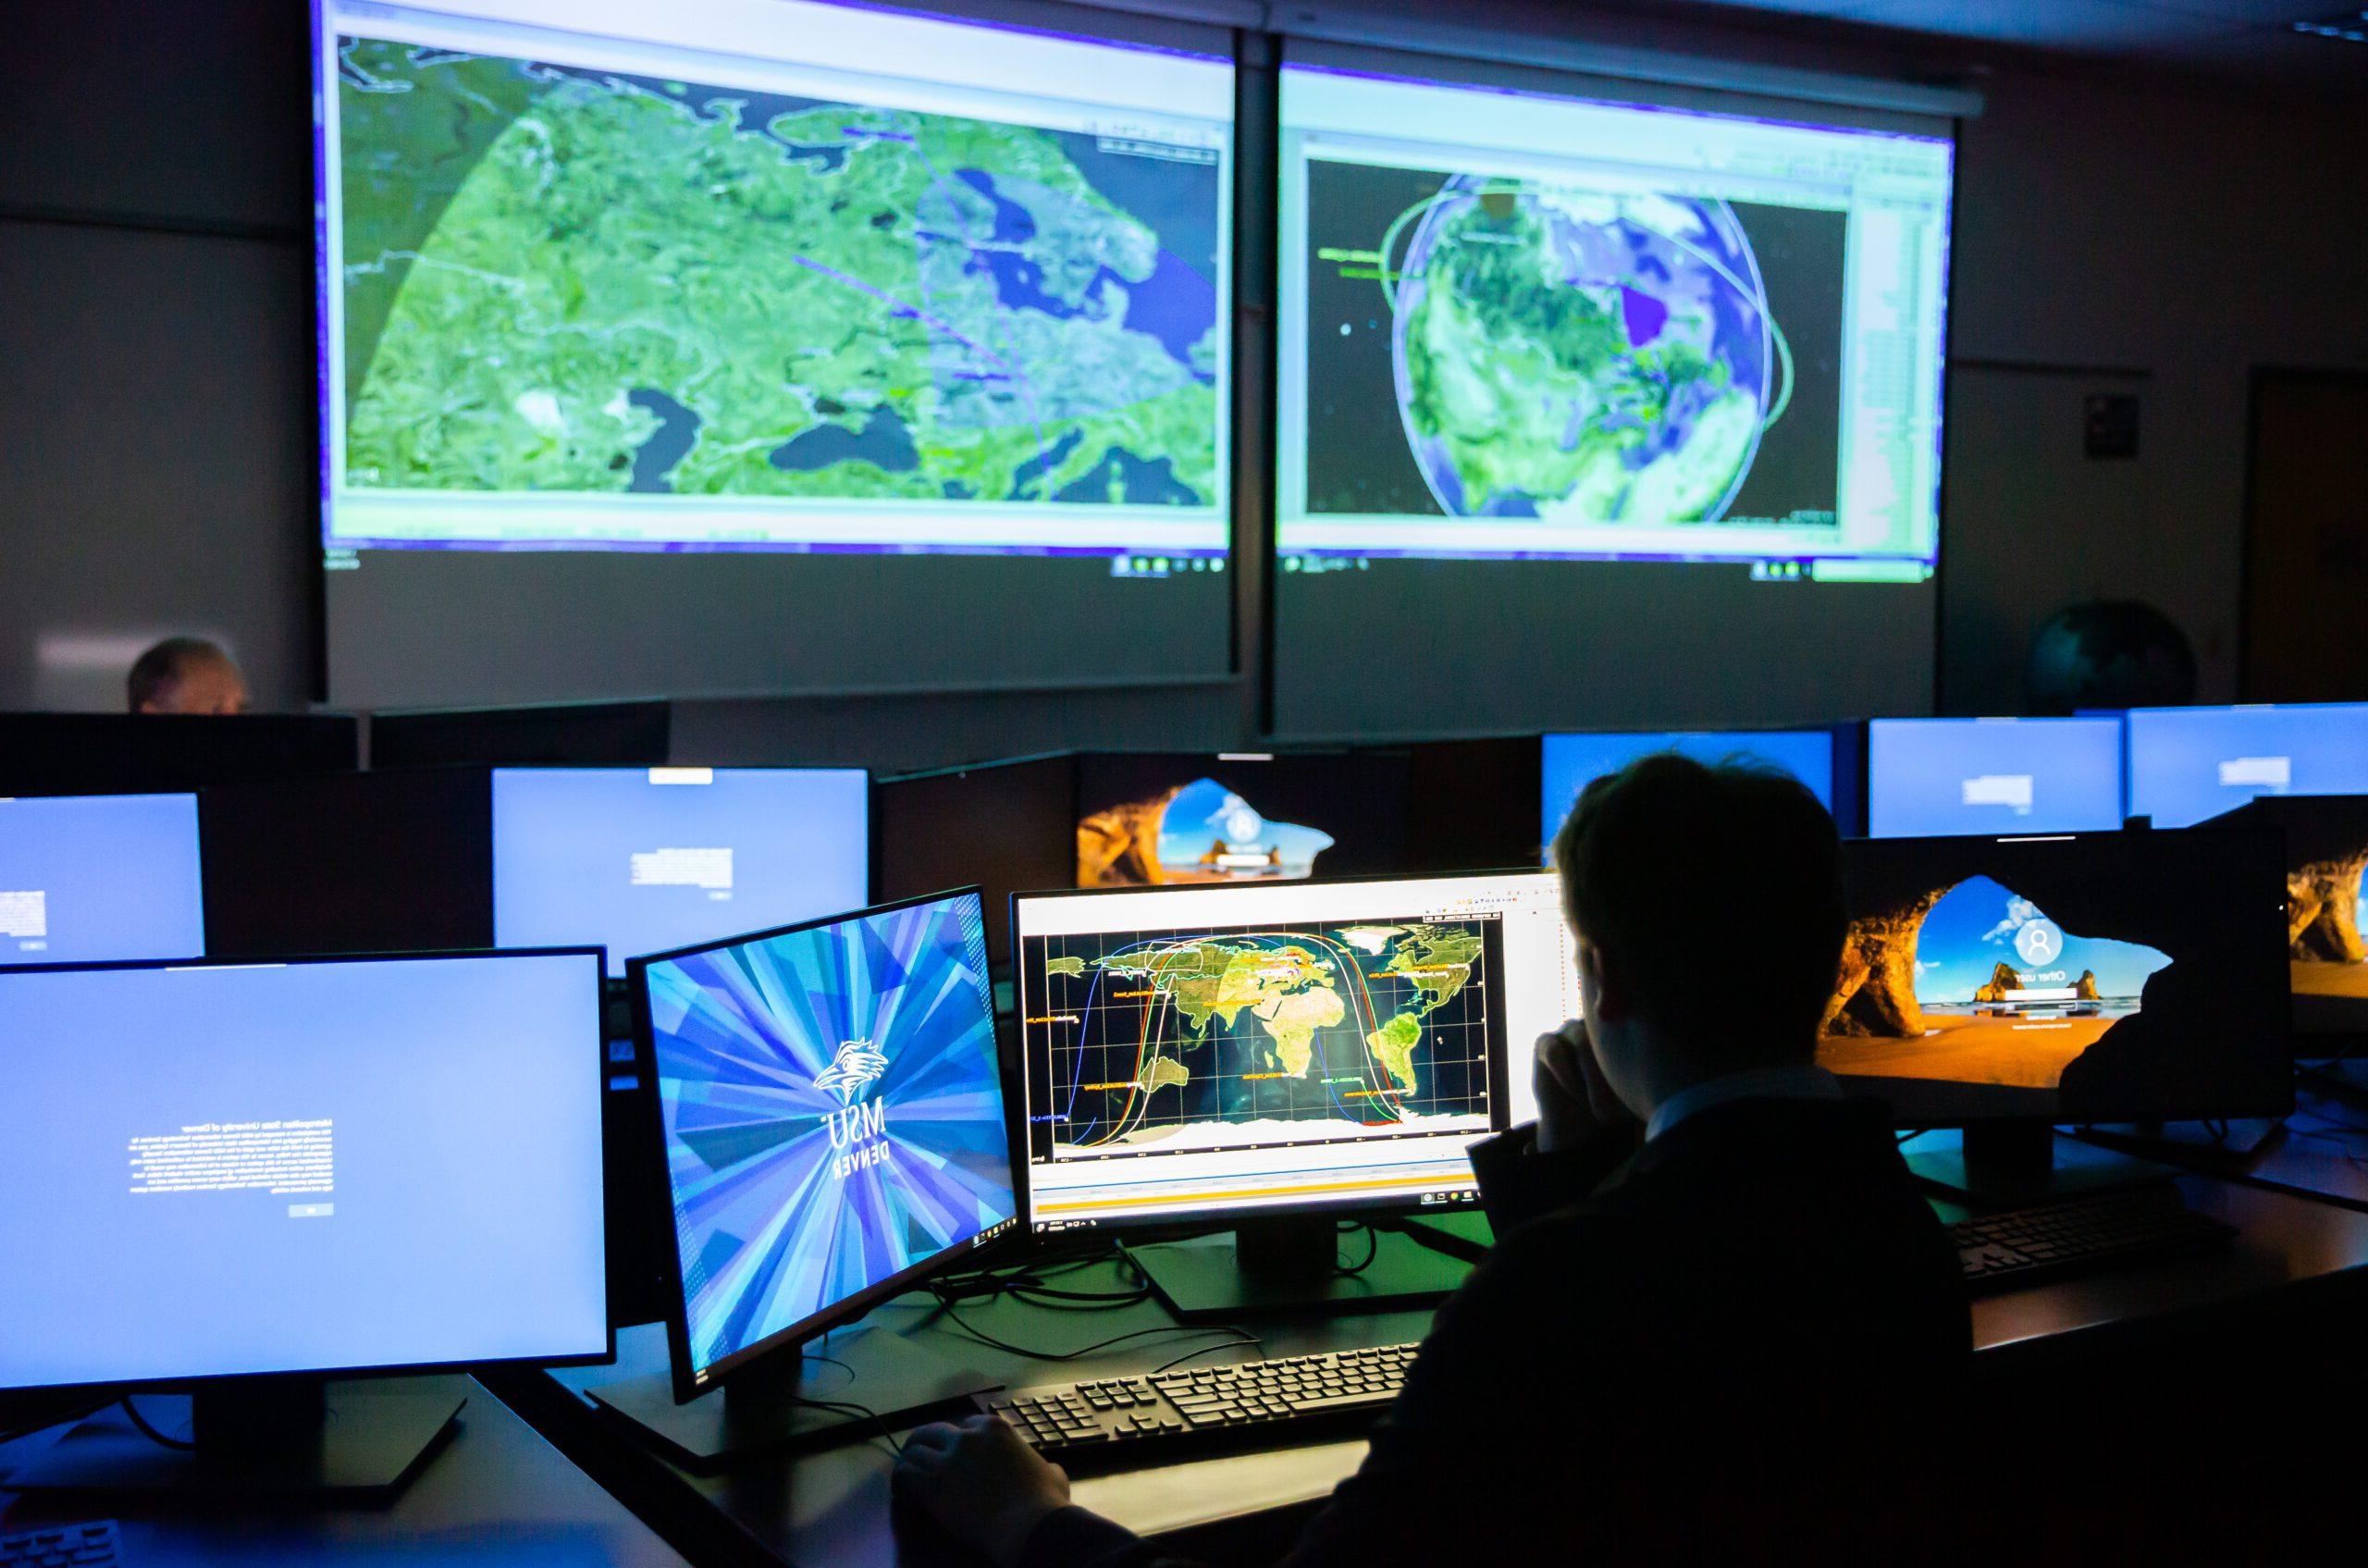 Adrian White, a graduating aviation and aerospace student in the Orbital Mechanics and Aerospace System simulation class, has built out real-life scenarios using open-source satellite data from MAXAR that shows images of the conflict in Ukraine.